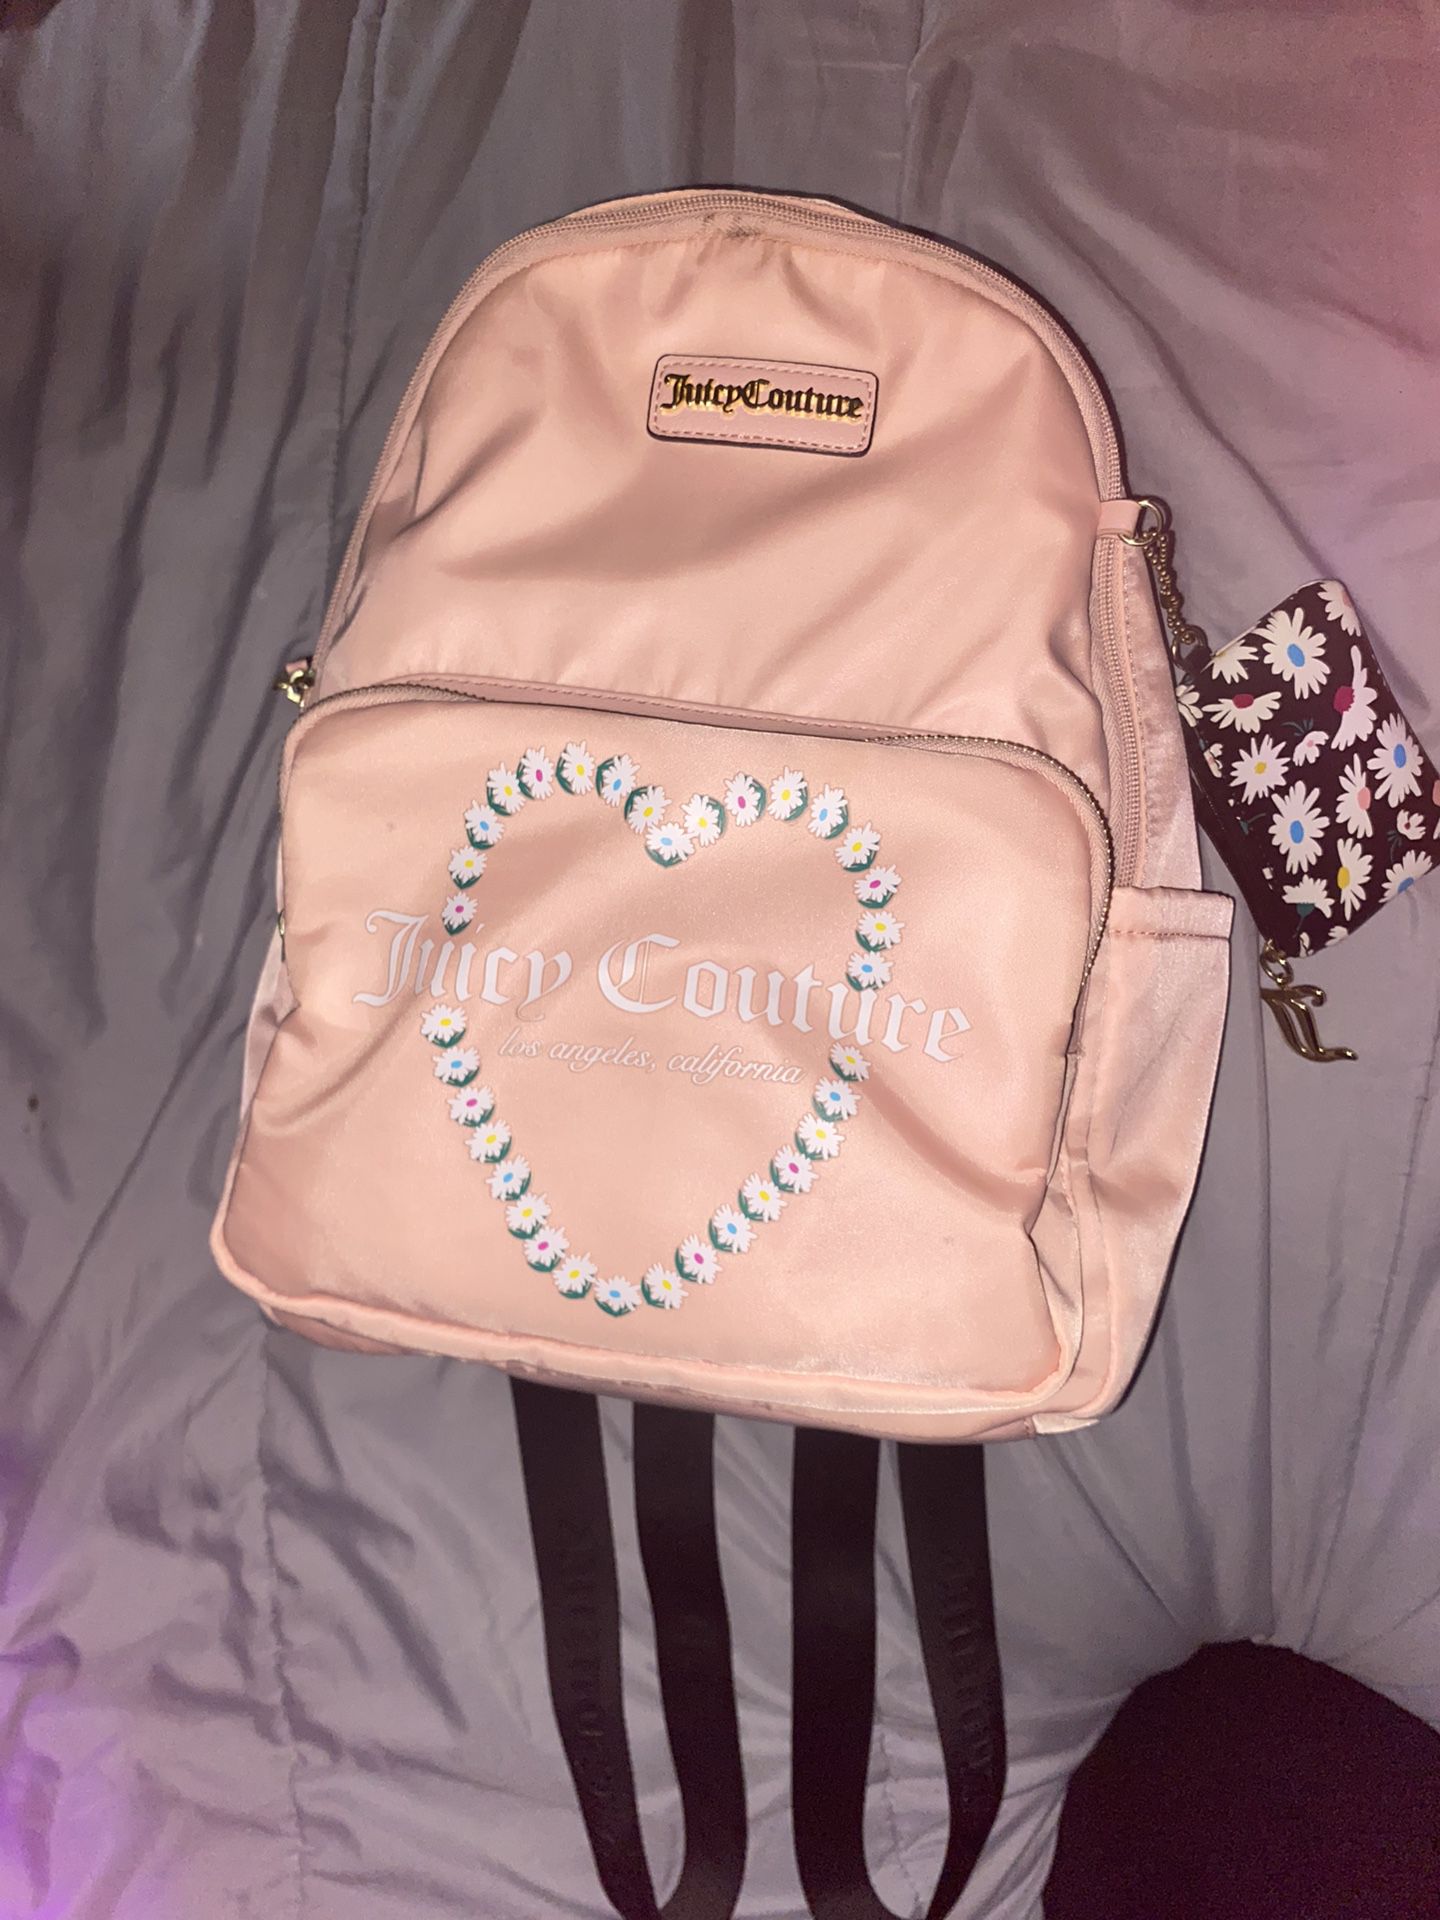 Pink Juicy Couture Backpack